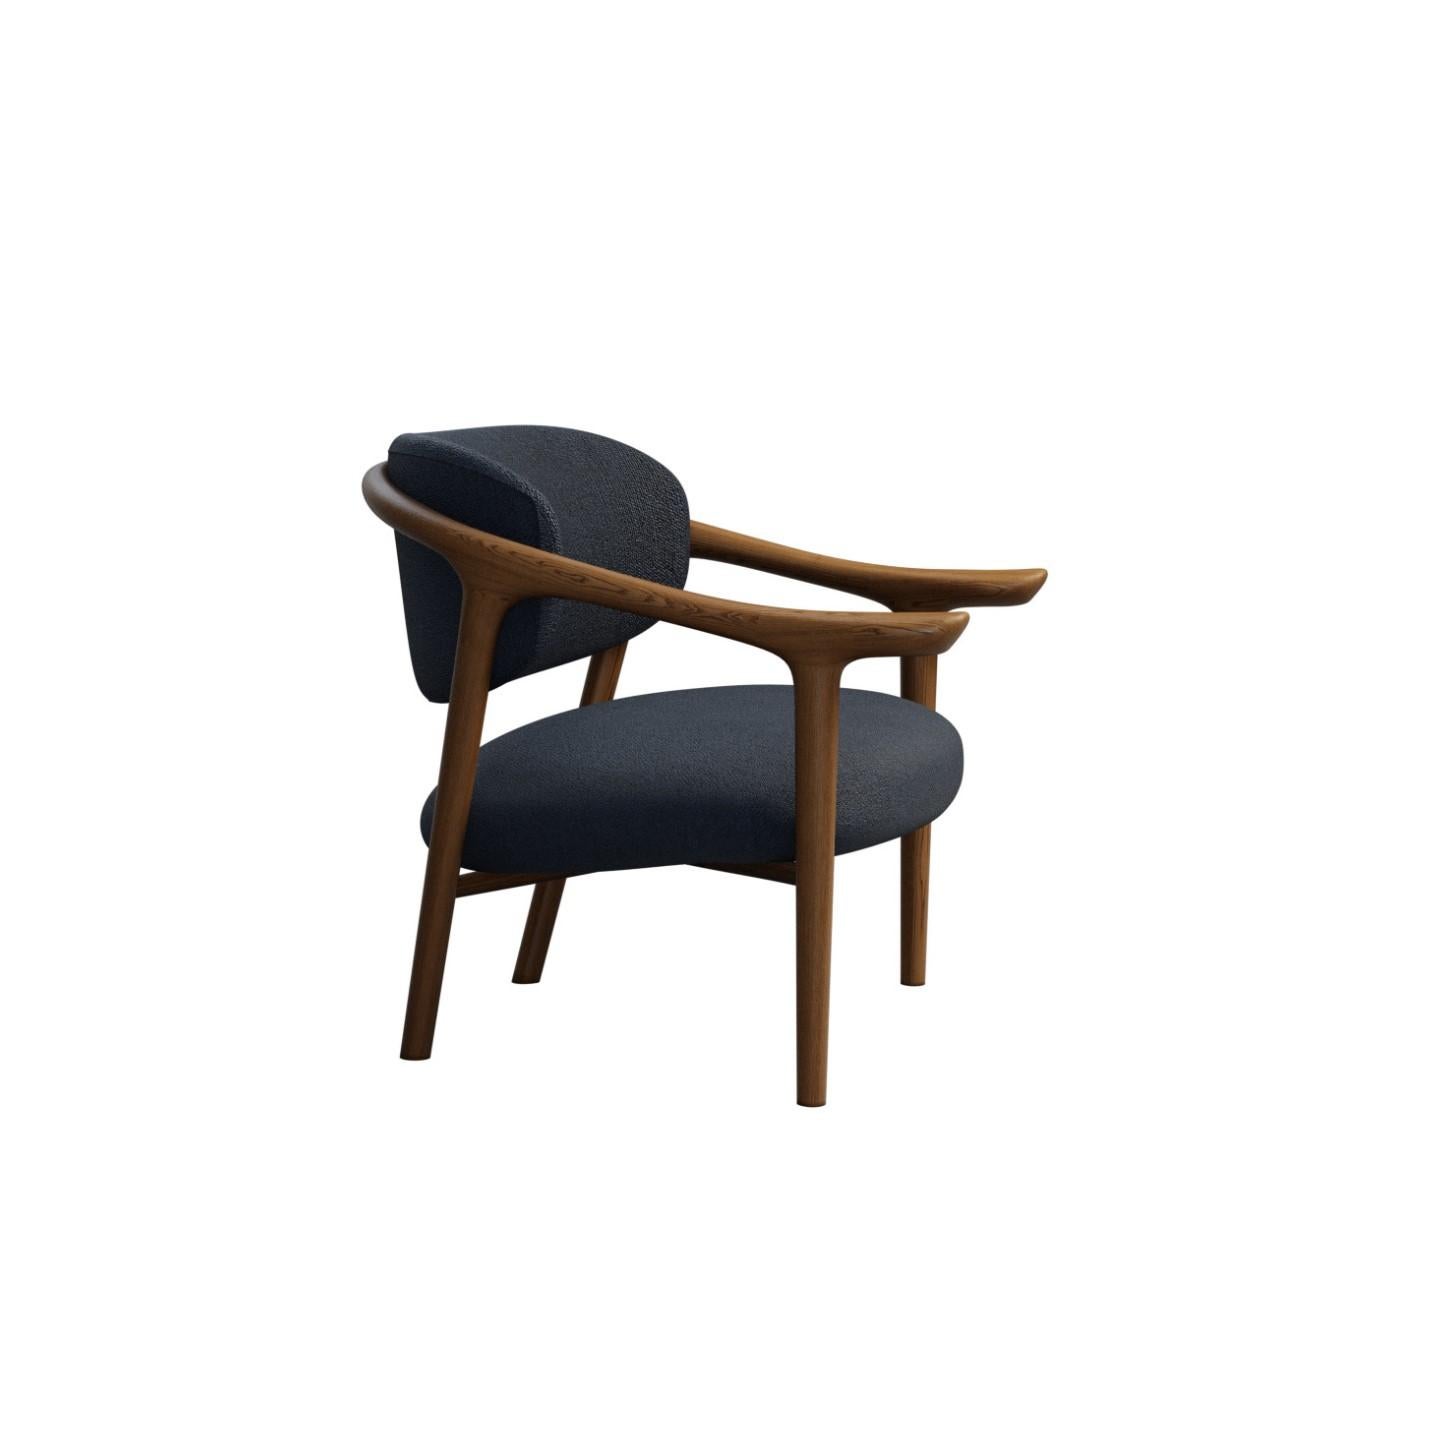 Aida is and armchair in curved ash wood and upholstered seat and back with an iconic design.
Thanks to its elegance and comfort, this graceful, sinuous and versatile armchair adapts to different environments:
domestic or contract, expressing a